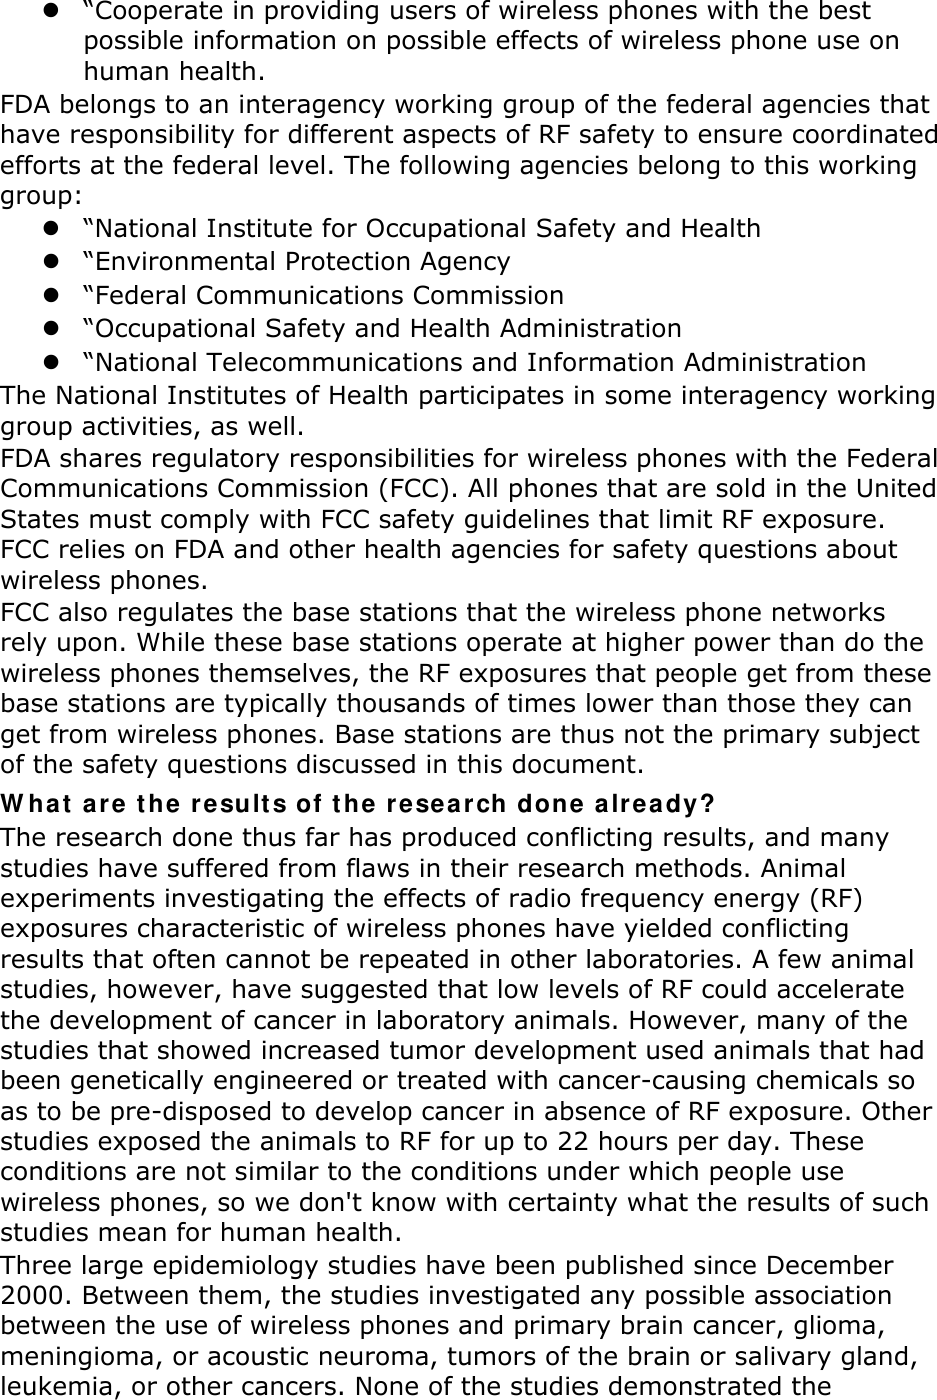  “Cooperate in providing users of wireless phones with the best possible information on possible effects of wireless phone use on human health. FDA belongs to an interagency working group of the federal agencies that have responsibility for different aspects of RF safety to ensure coordinated efforts at the federal level. The following agencies belong to this working group:  “National Institute for Occupational Safety and Health  “Environmental Protection Agency  “Federal Communications Commission  “Occupational Safety and Health Administration  “National Telecommunications and Information Administration The National Institutes of Health participates in some interagency working group activities, as well. FDA shares regulatory responsibilities for wireless phones with the Federal Communications Commission (FCC). All phones that are sold in the United States must comply with FCC safety guidelines that limit RF exposure. FCC relies on FDA and other health agencies for safety questions about wireless phones. FCC also regulates the base stations that the wireless phone networks rely upon. While these base stations operate at higher power than do the wireless phones themselves, the RF exposures that people get from these base stations are typically thousands of times lower than those they can get from wireless phones. Base stations are thus not the primary subject of the safety questions discussed in this document. W ha t  a re t h e result s of the r e se a r ch  done a lr eady? The research done thus far has produced conflicting results, and many studies have suffered from flaws in their research methods. Animal experiments investigating the effects of radio frequency energy (RF) exposures characteristic of wireless phones have yielded conflicting results that often cannot be repeated in other laboratories. A few animal studies, however, have suggested that low levels of RF could accelerate the development of cancer in laboratory animals. However, many of the studies that showed increased tumor development used animals that had been genetically engineered or treated with cancer-causing chemicals so as to be pre-disposed to develop cancer in absence of RF exposure. Other studies exposed the animals to RF for up to 22 hours per day. These conditions are not similar to the conditions under which people use wireless phones, so we don&apos;t know with certainty what the results of such studies mean for human health. Three large epidemiology studies have been published since December 2000. Between them, the studies investigated any possible association between the use of wireless phones and primary brain cancer, glioma, meningioma, or acoustic neuroma, tumors of the brain or salivary gland, leukemia, or other cancers. None of the studies demonstrated the 